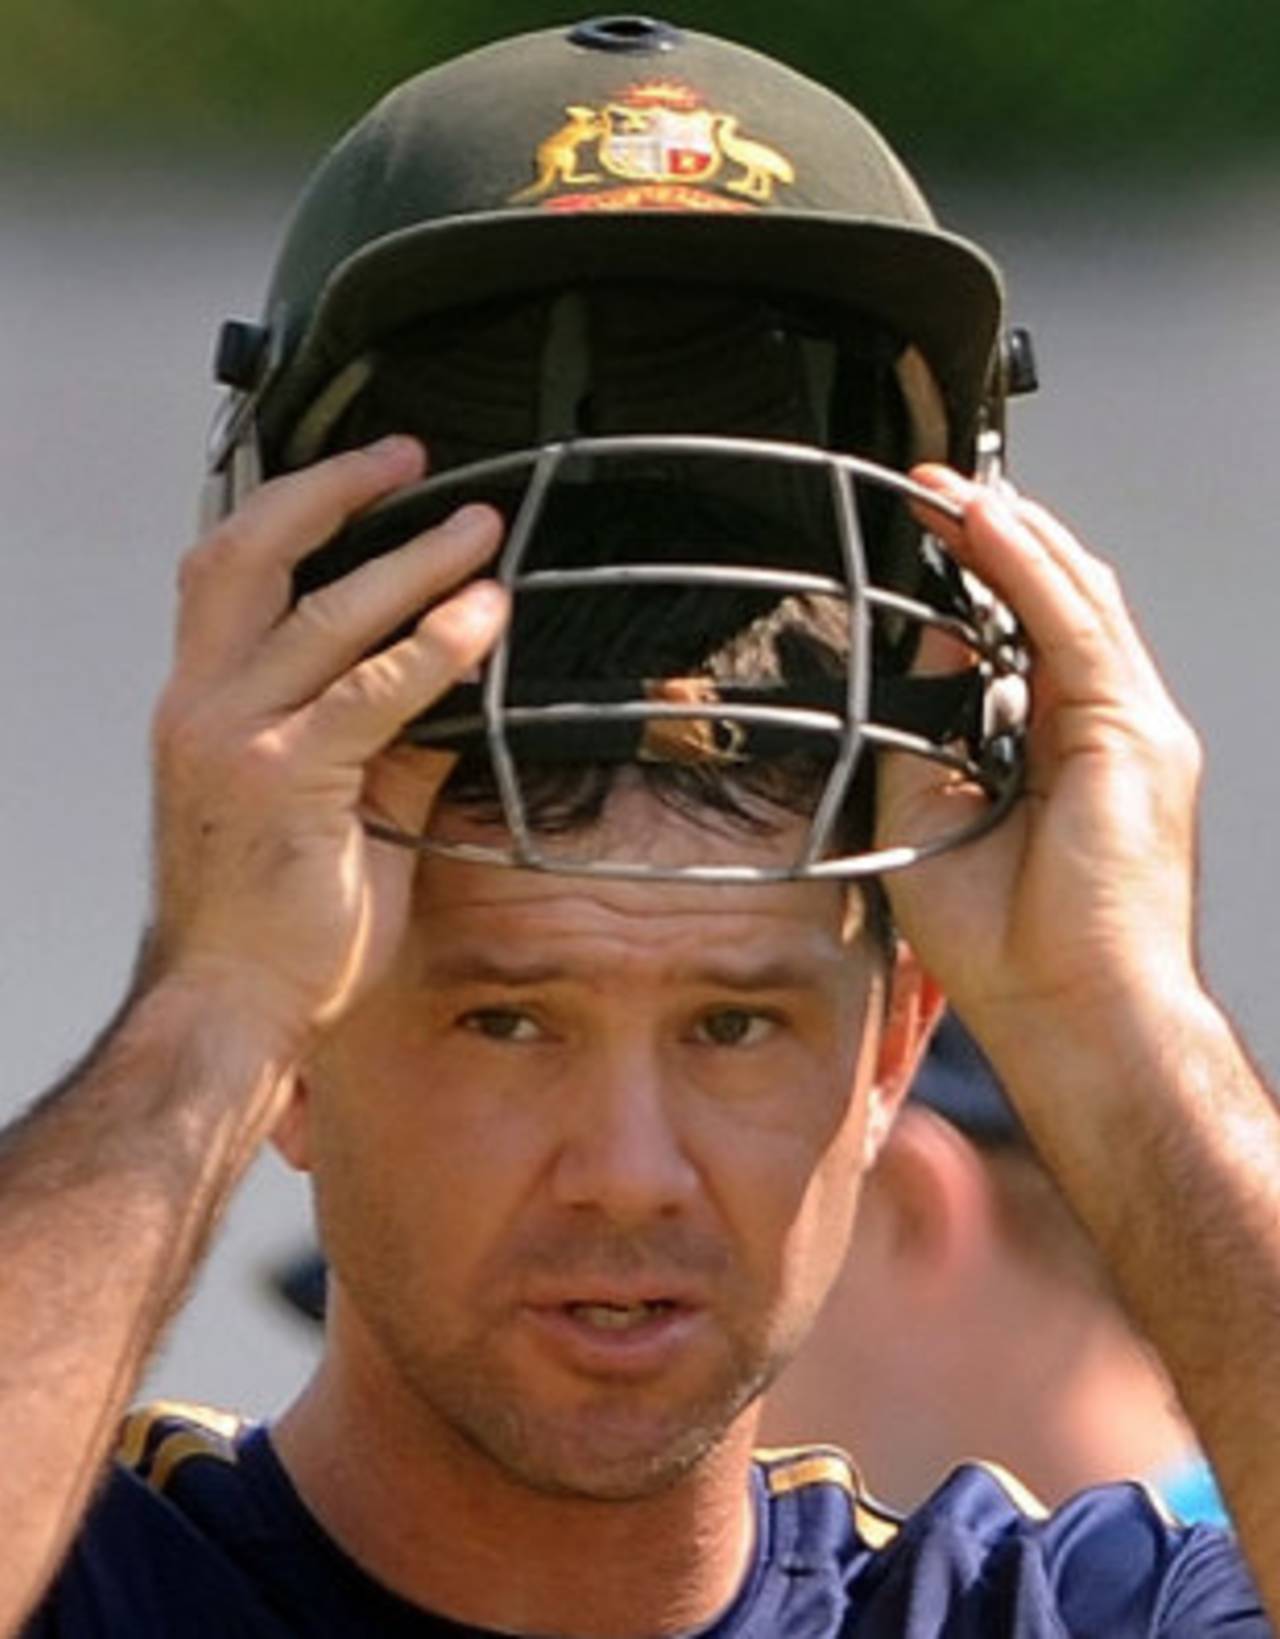 Ricky Ponting takes a breather during practice, Nagpur, October 27, 2009